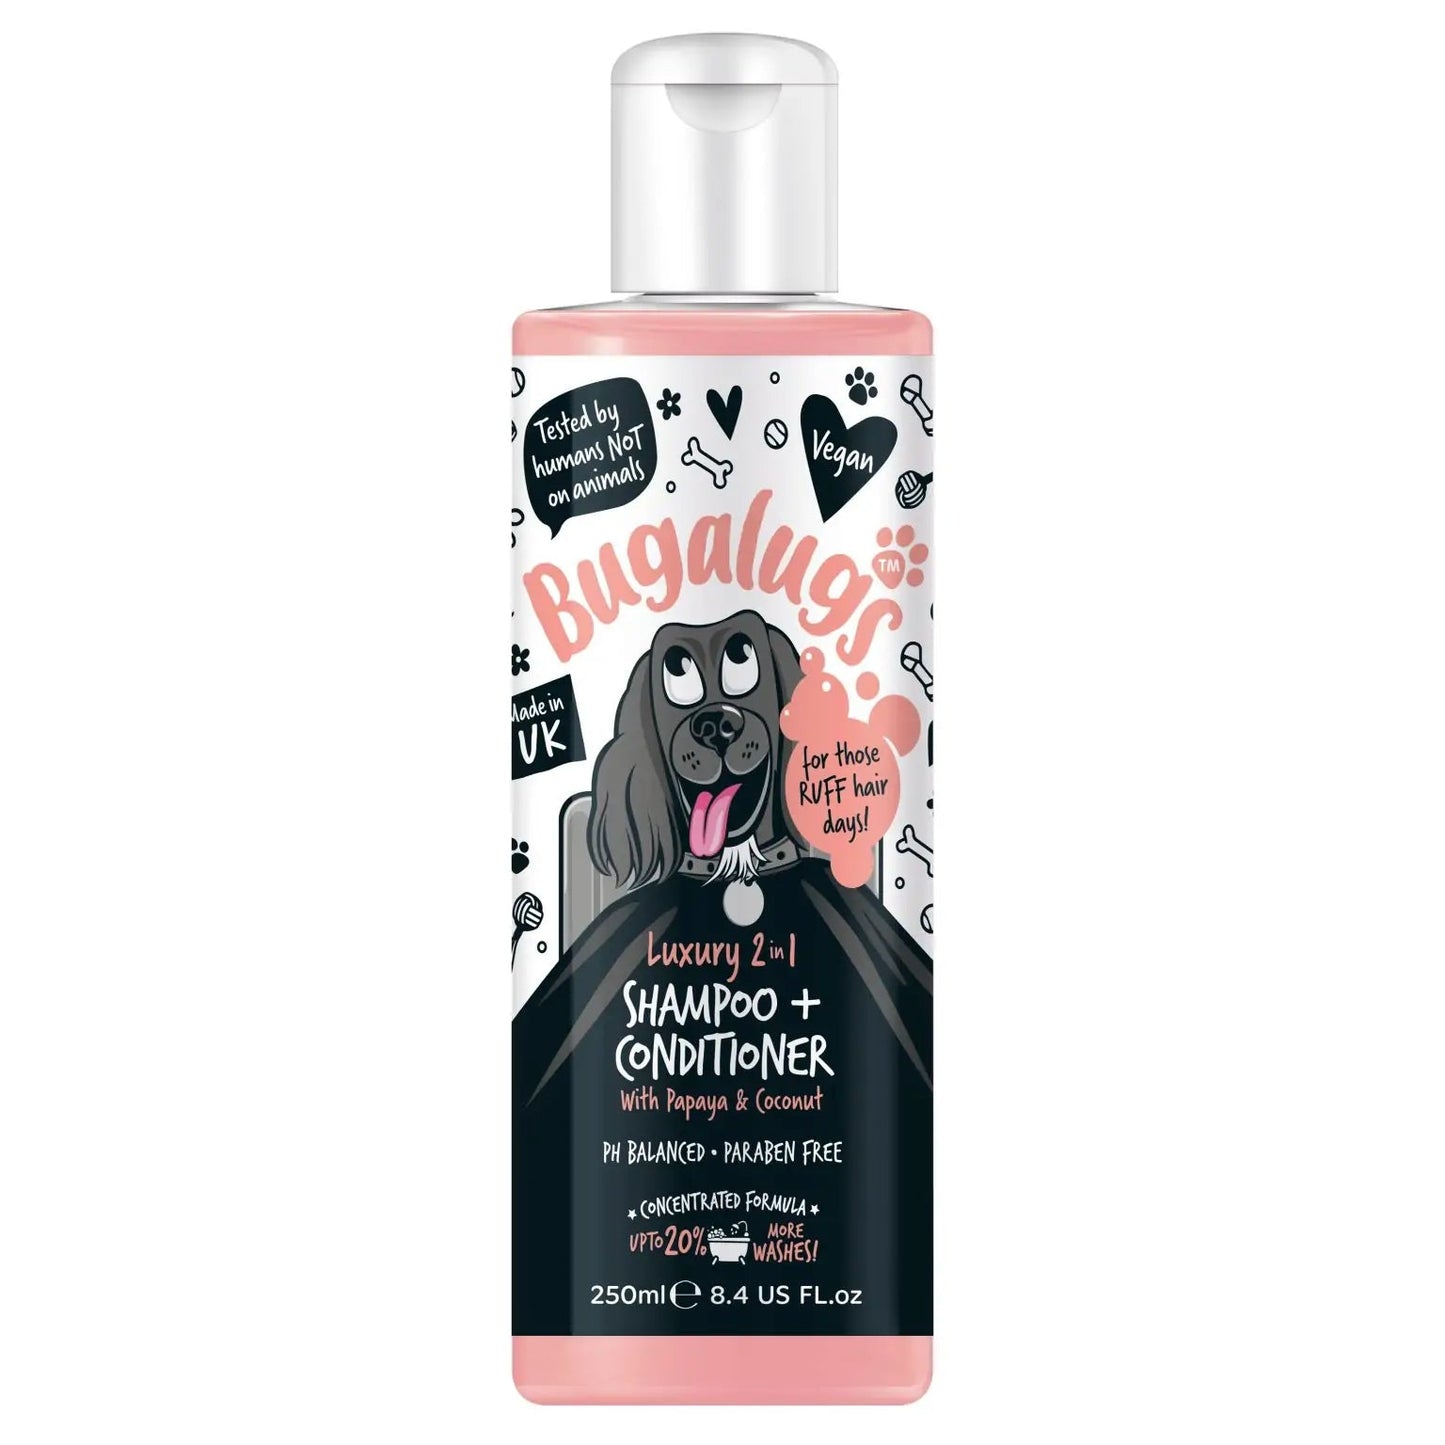 Bugalugs Luxury 2 in 1 Dog Shampoo & Conditioner - Natural Doggy Treats